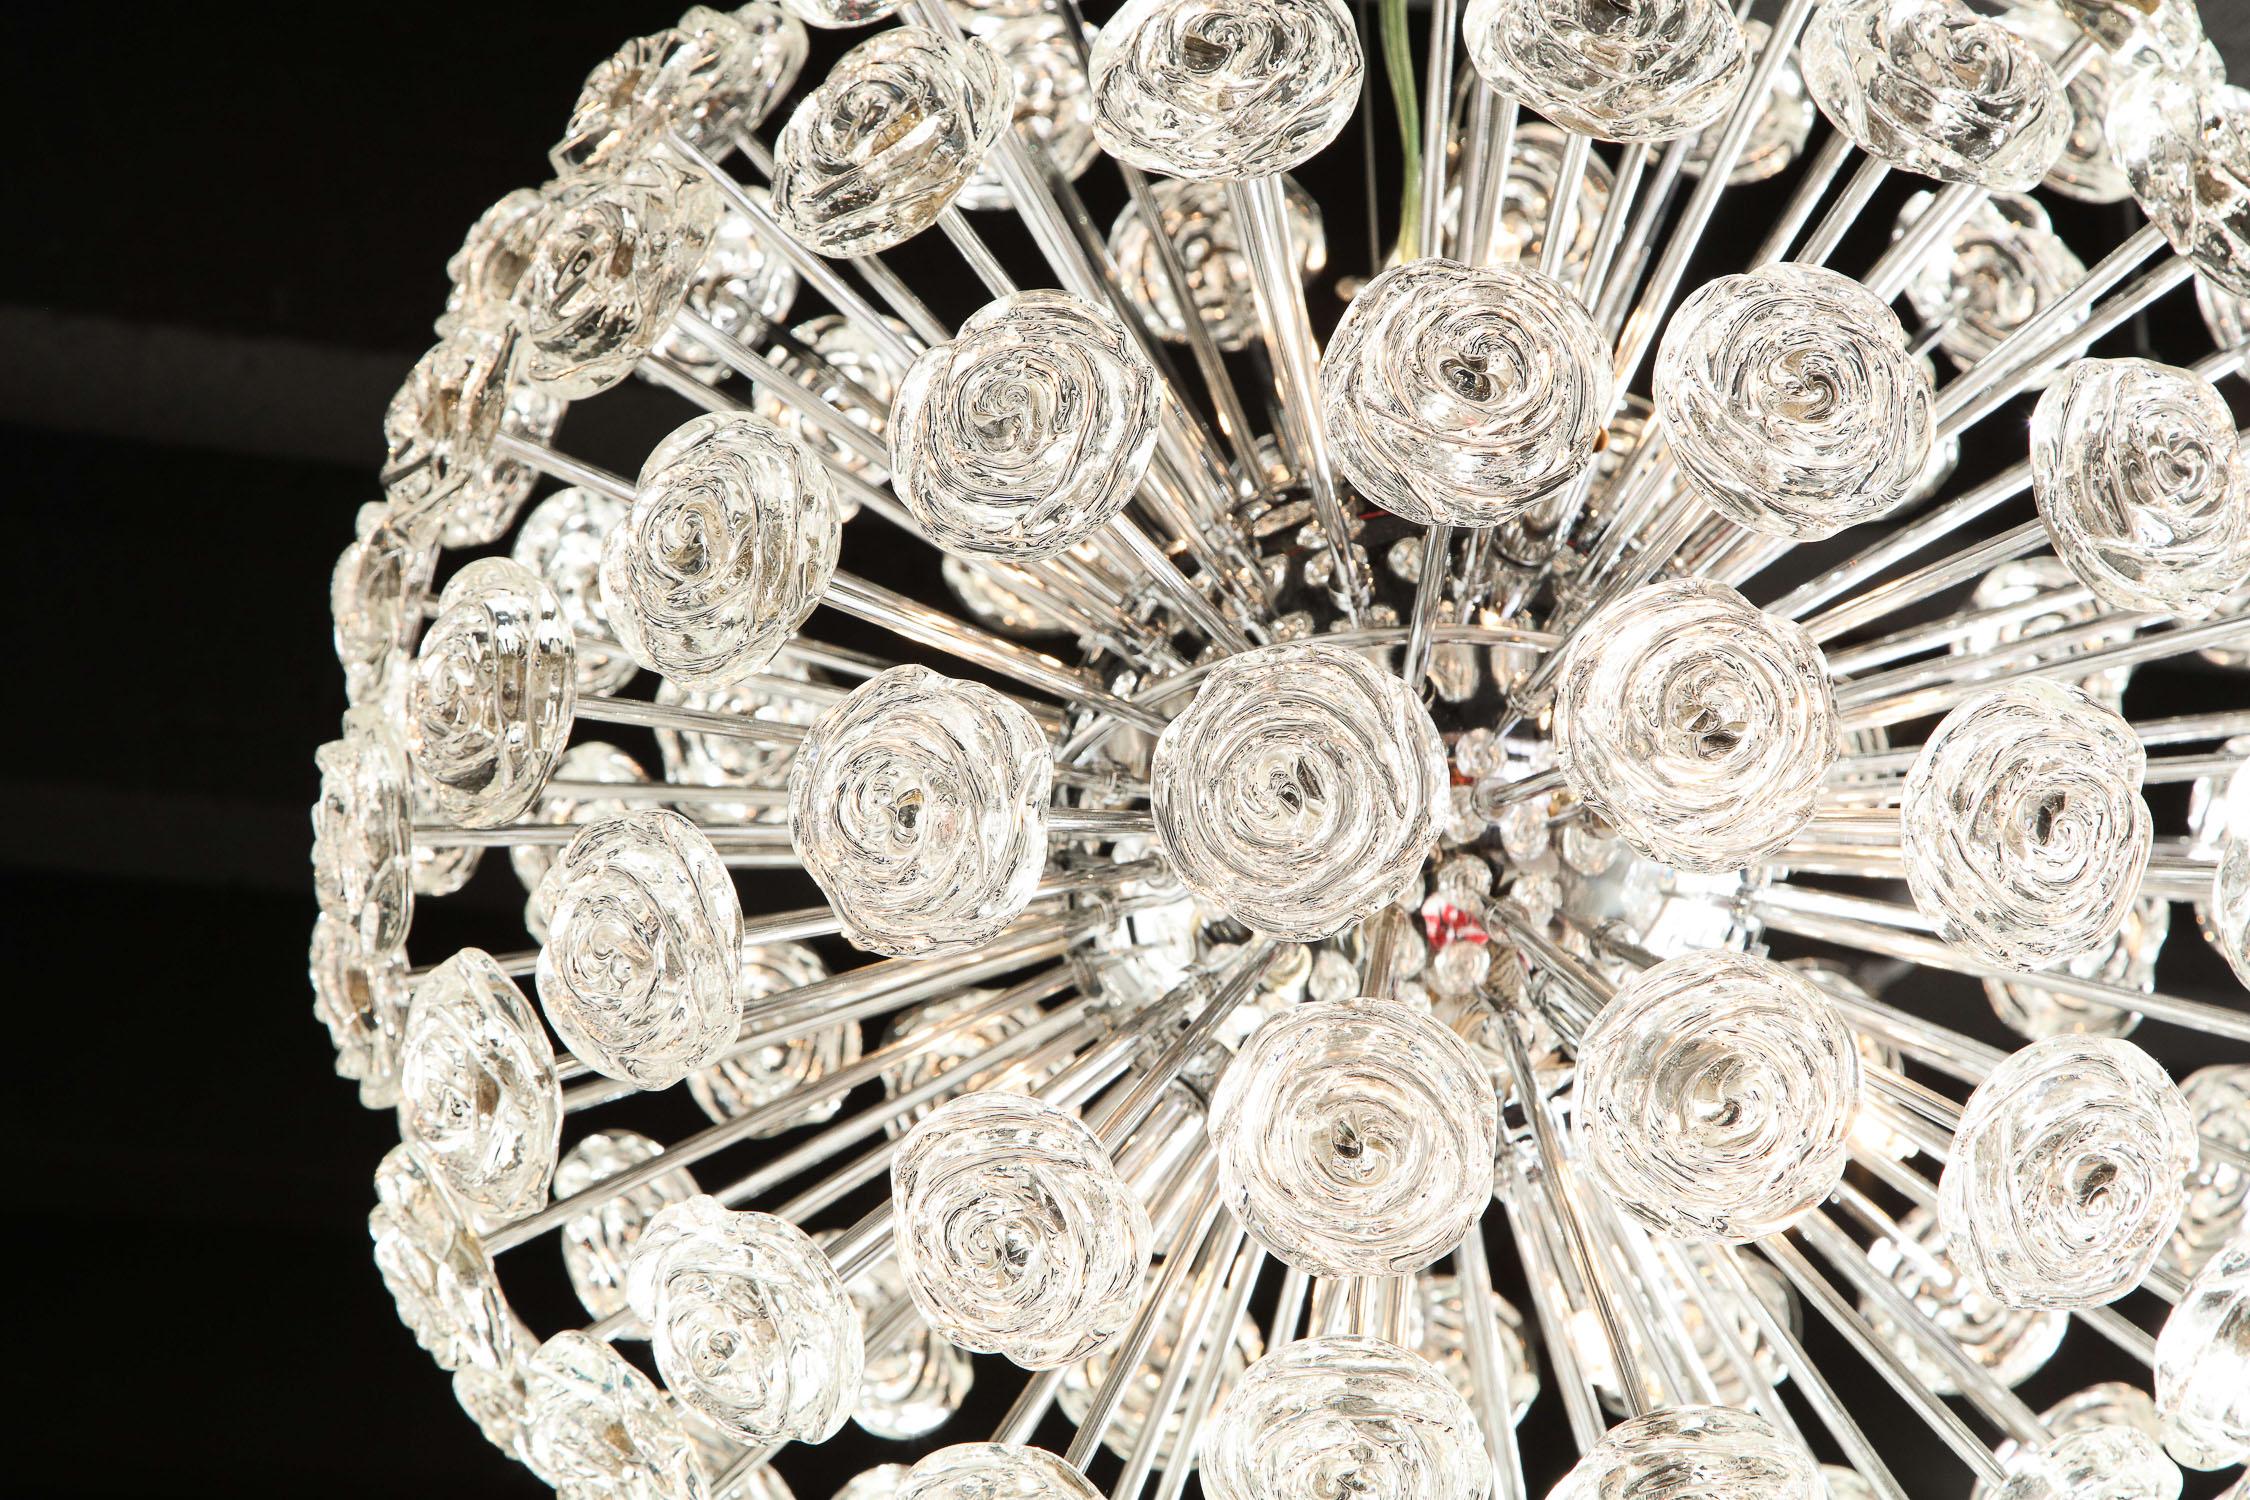 Contemporary Chandelier with Glass Roses, Midcentury Design, Large Chrome Sphere, Italy For Sale